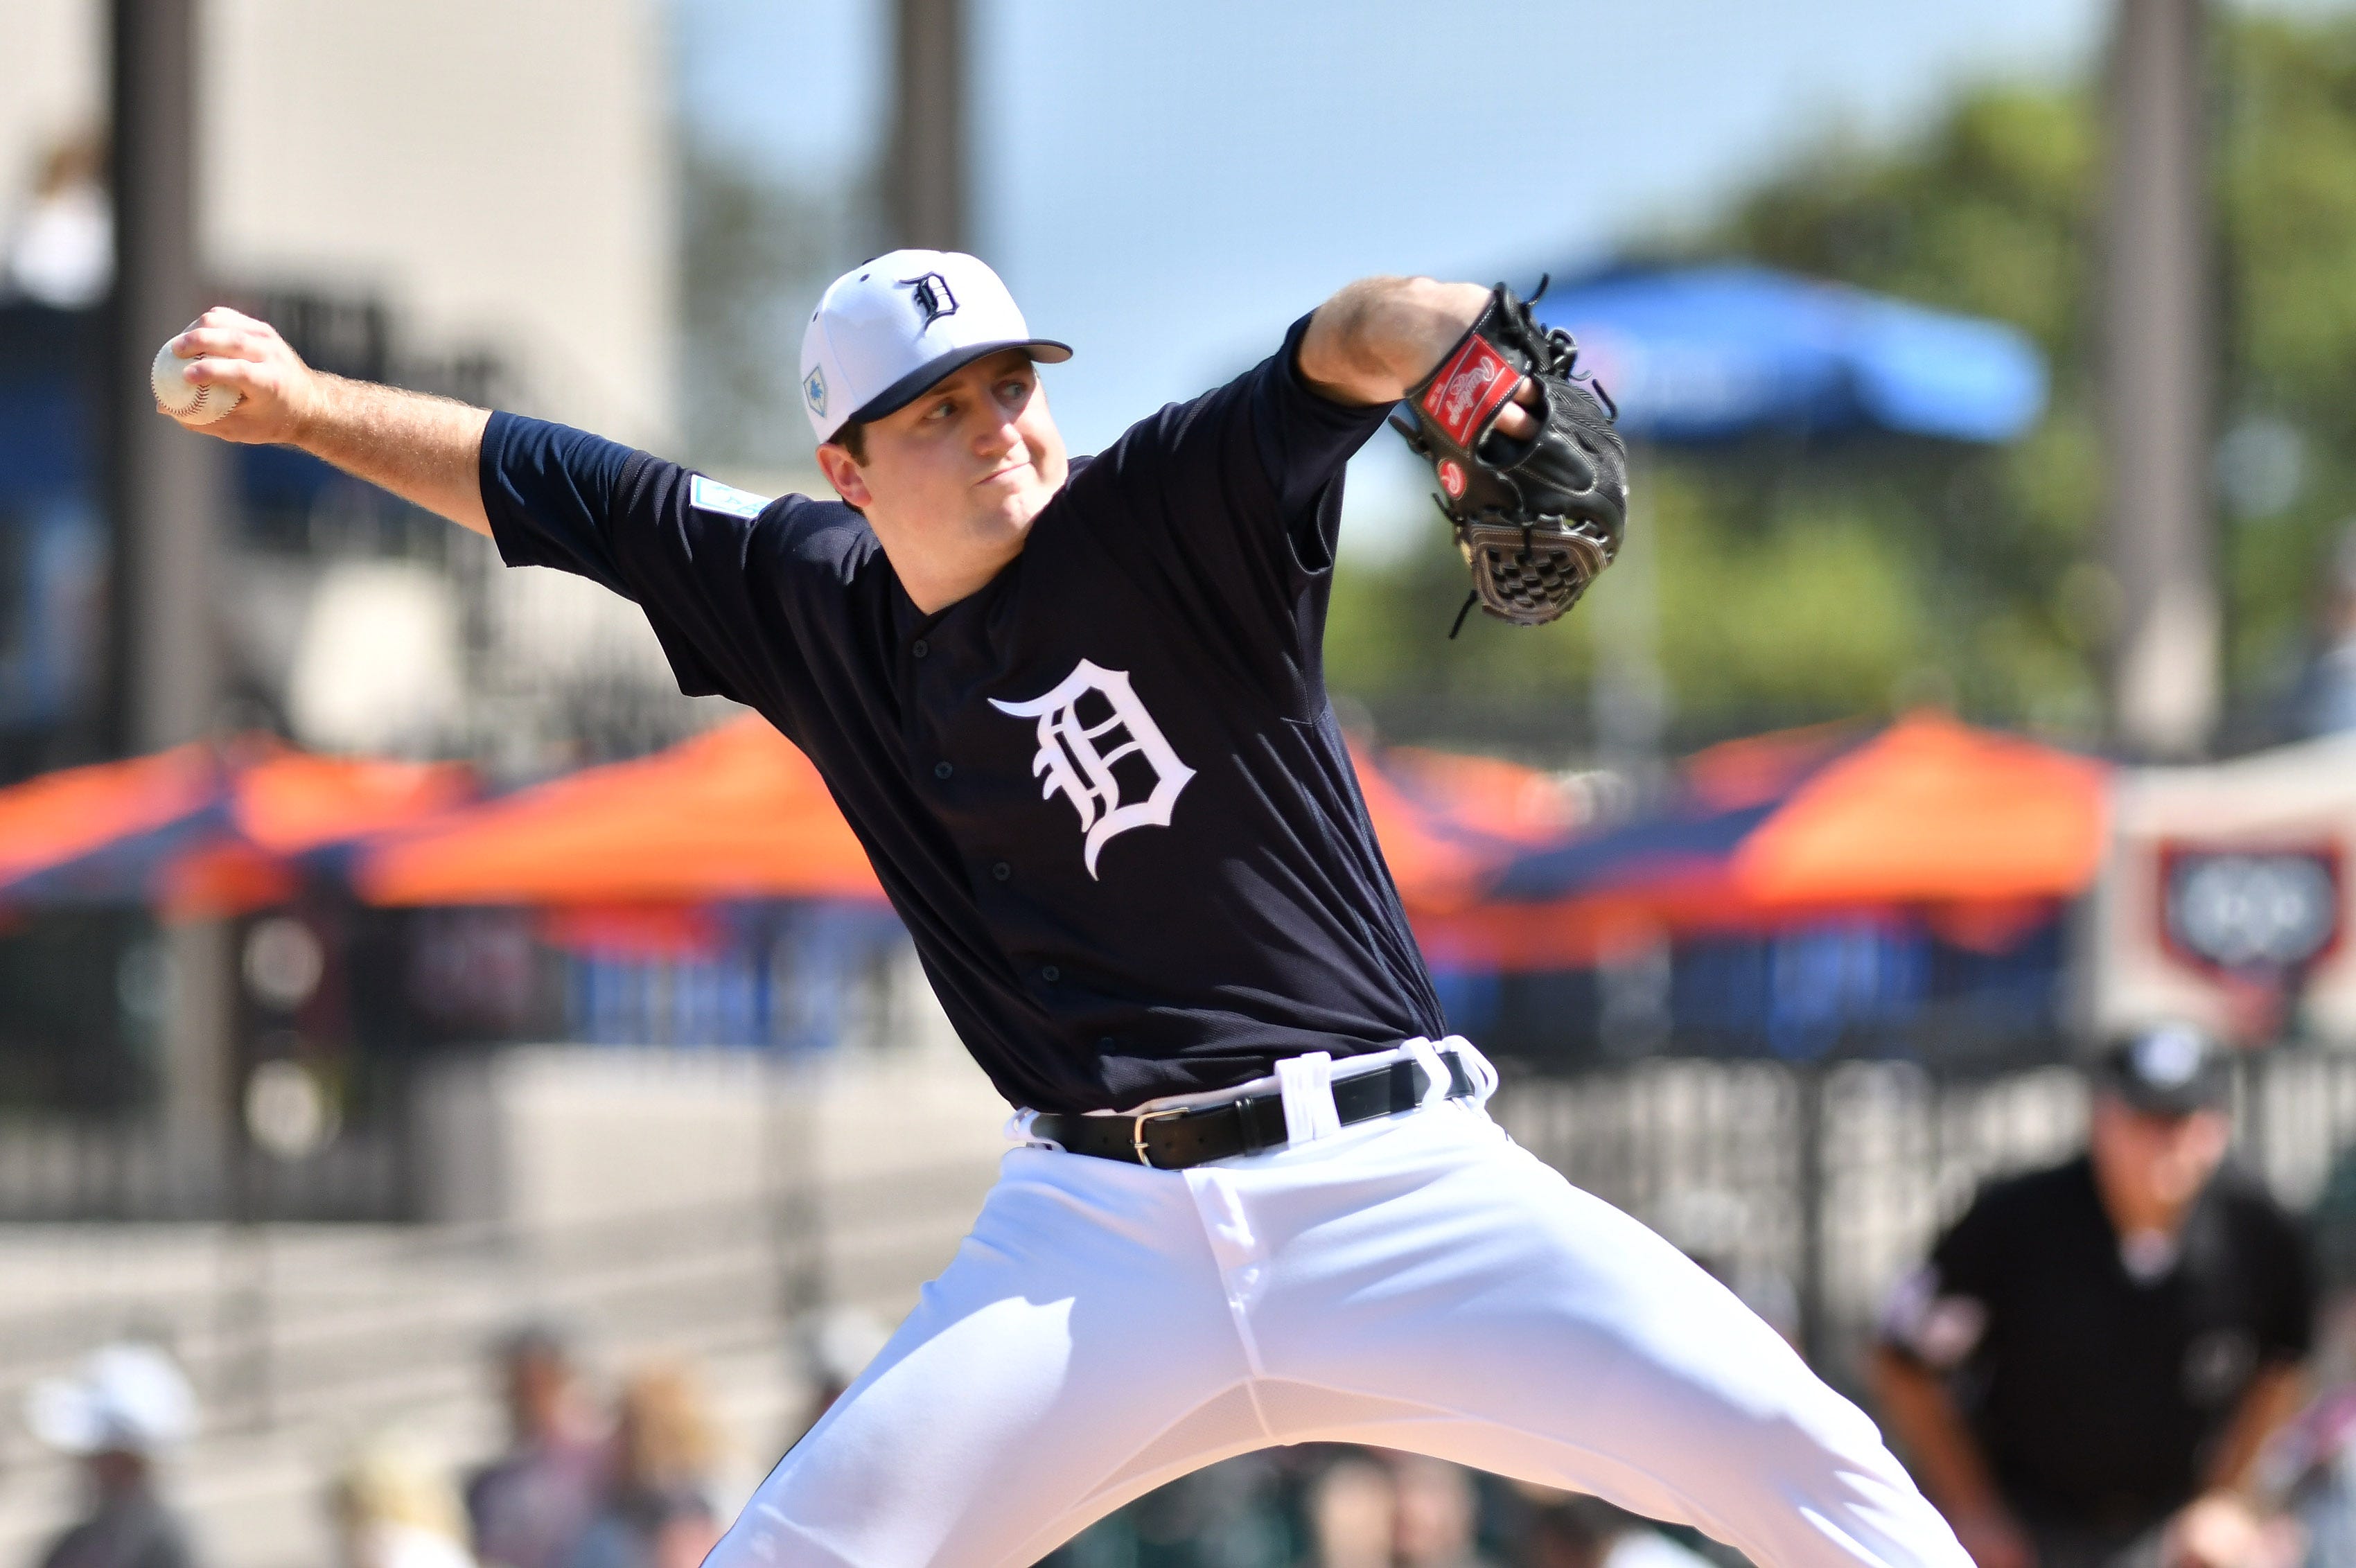 3. Casey Mize, 22, 6-3, 220, RH starter: In another year Mize could be back on top of any Top 50 Tigers Prospects rankings. He could be readying for a 2021 rotation spot because of a 2020 season that was steadily strong and might have brought him a hurry-up ticket to Detroit. Mize, though, needs innings this year after throwing 109.1 in 2019 (2.55 ERA, .094 WHIP) and dealing with some shoulder inflammation. The soreness wasn’t judged to be serious. It simply cost him starts and innings during the second half. He should be in premier shape, and status, as 2020 evolves.